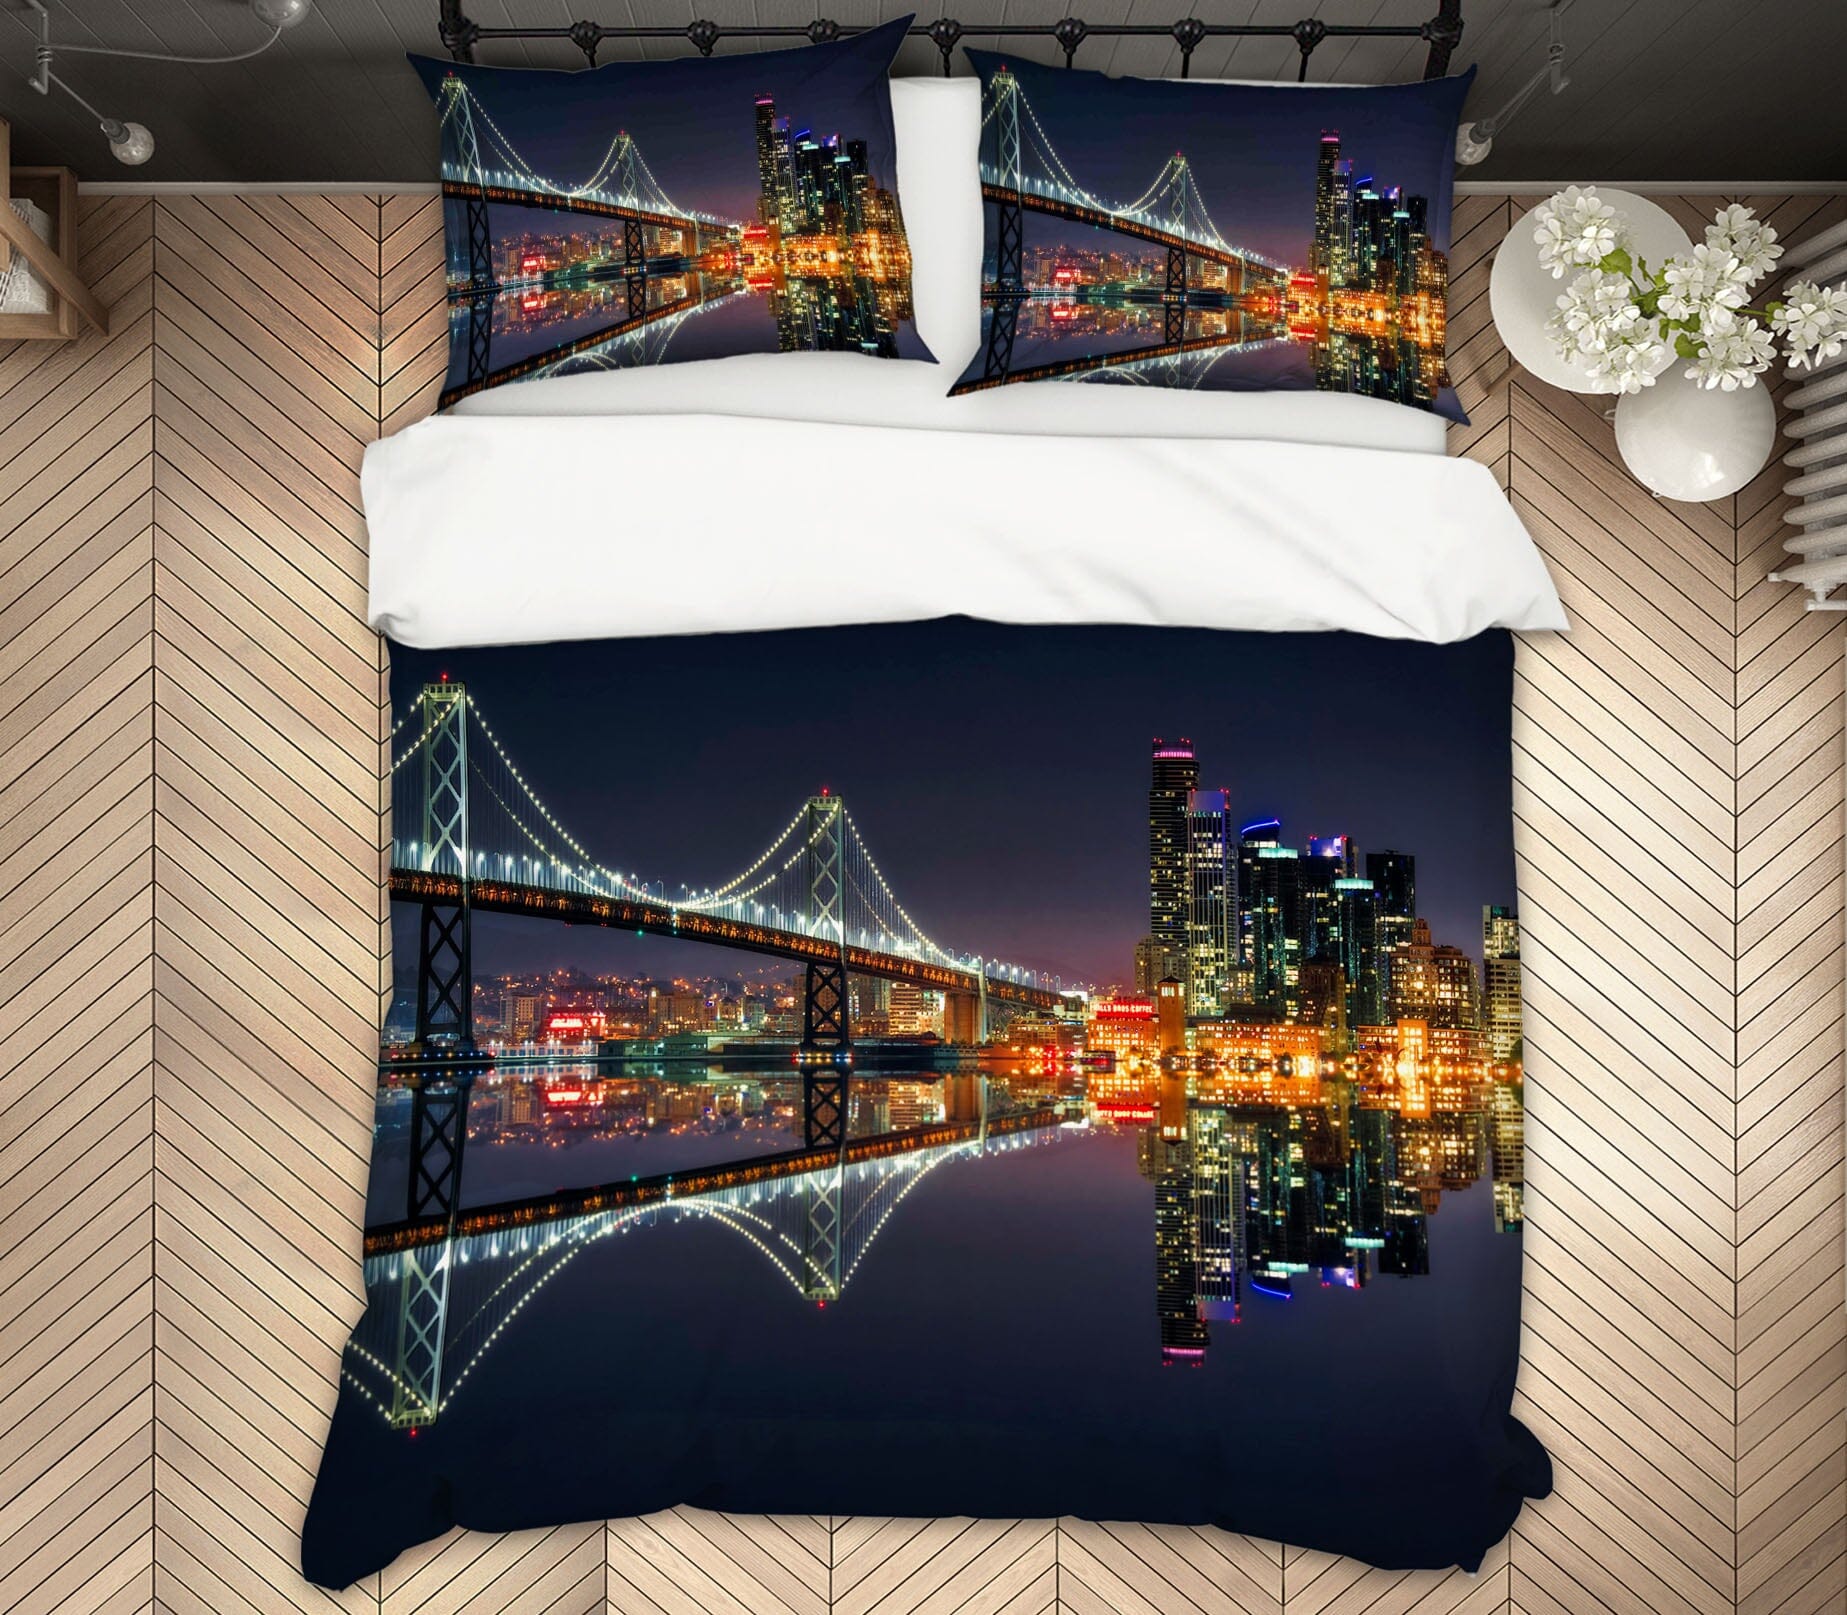 3D Canal Lights 2111 Marco Carmassi Bedding Bed Pillowcases Quilt Quiet Covers AJ Creativity Home 